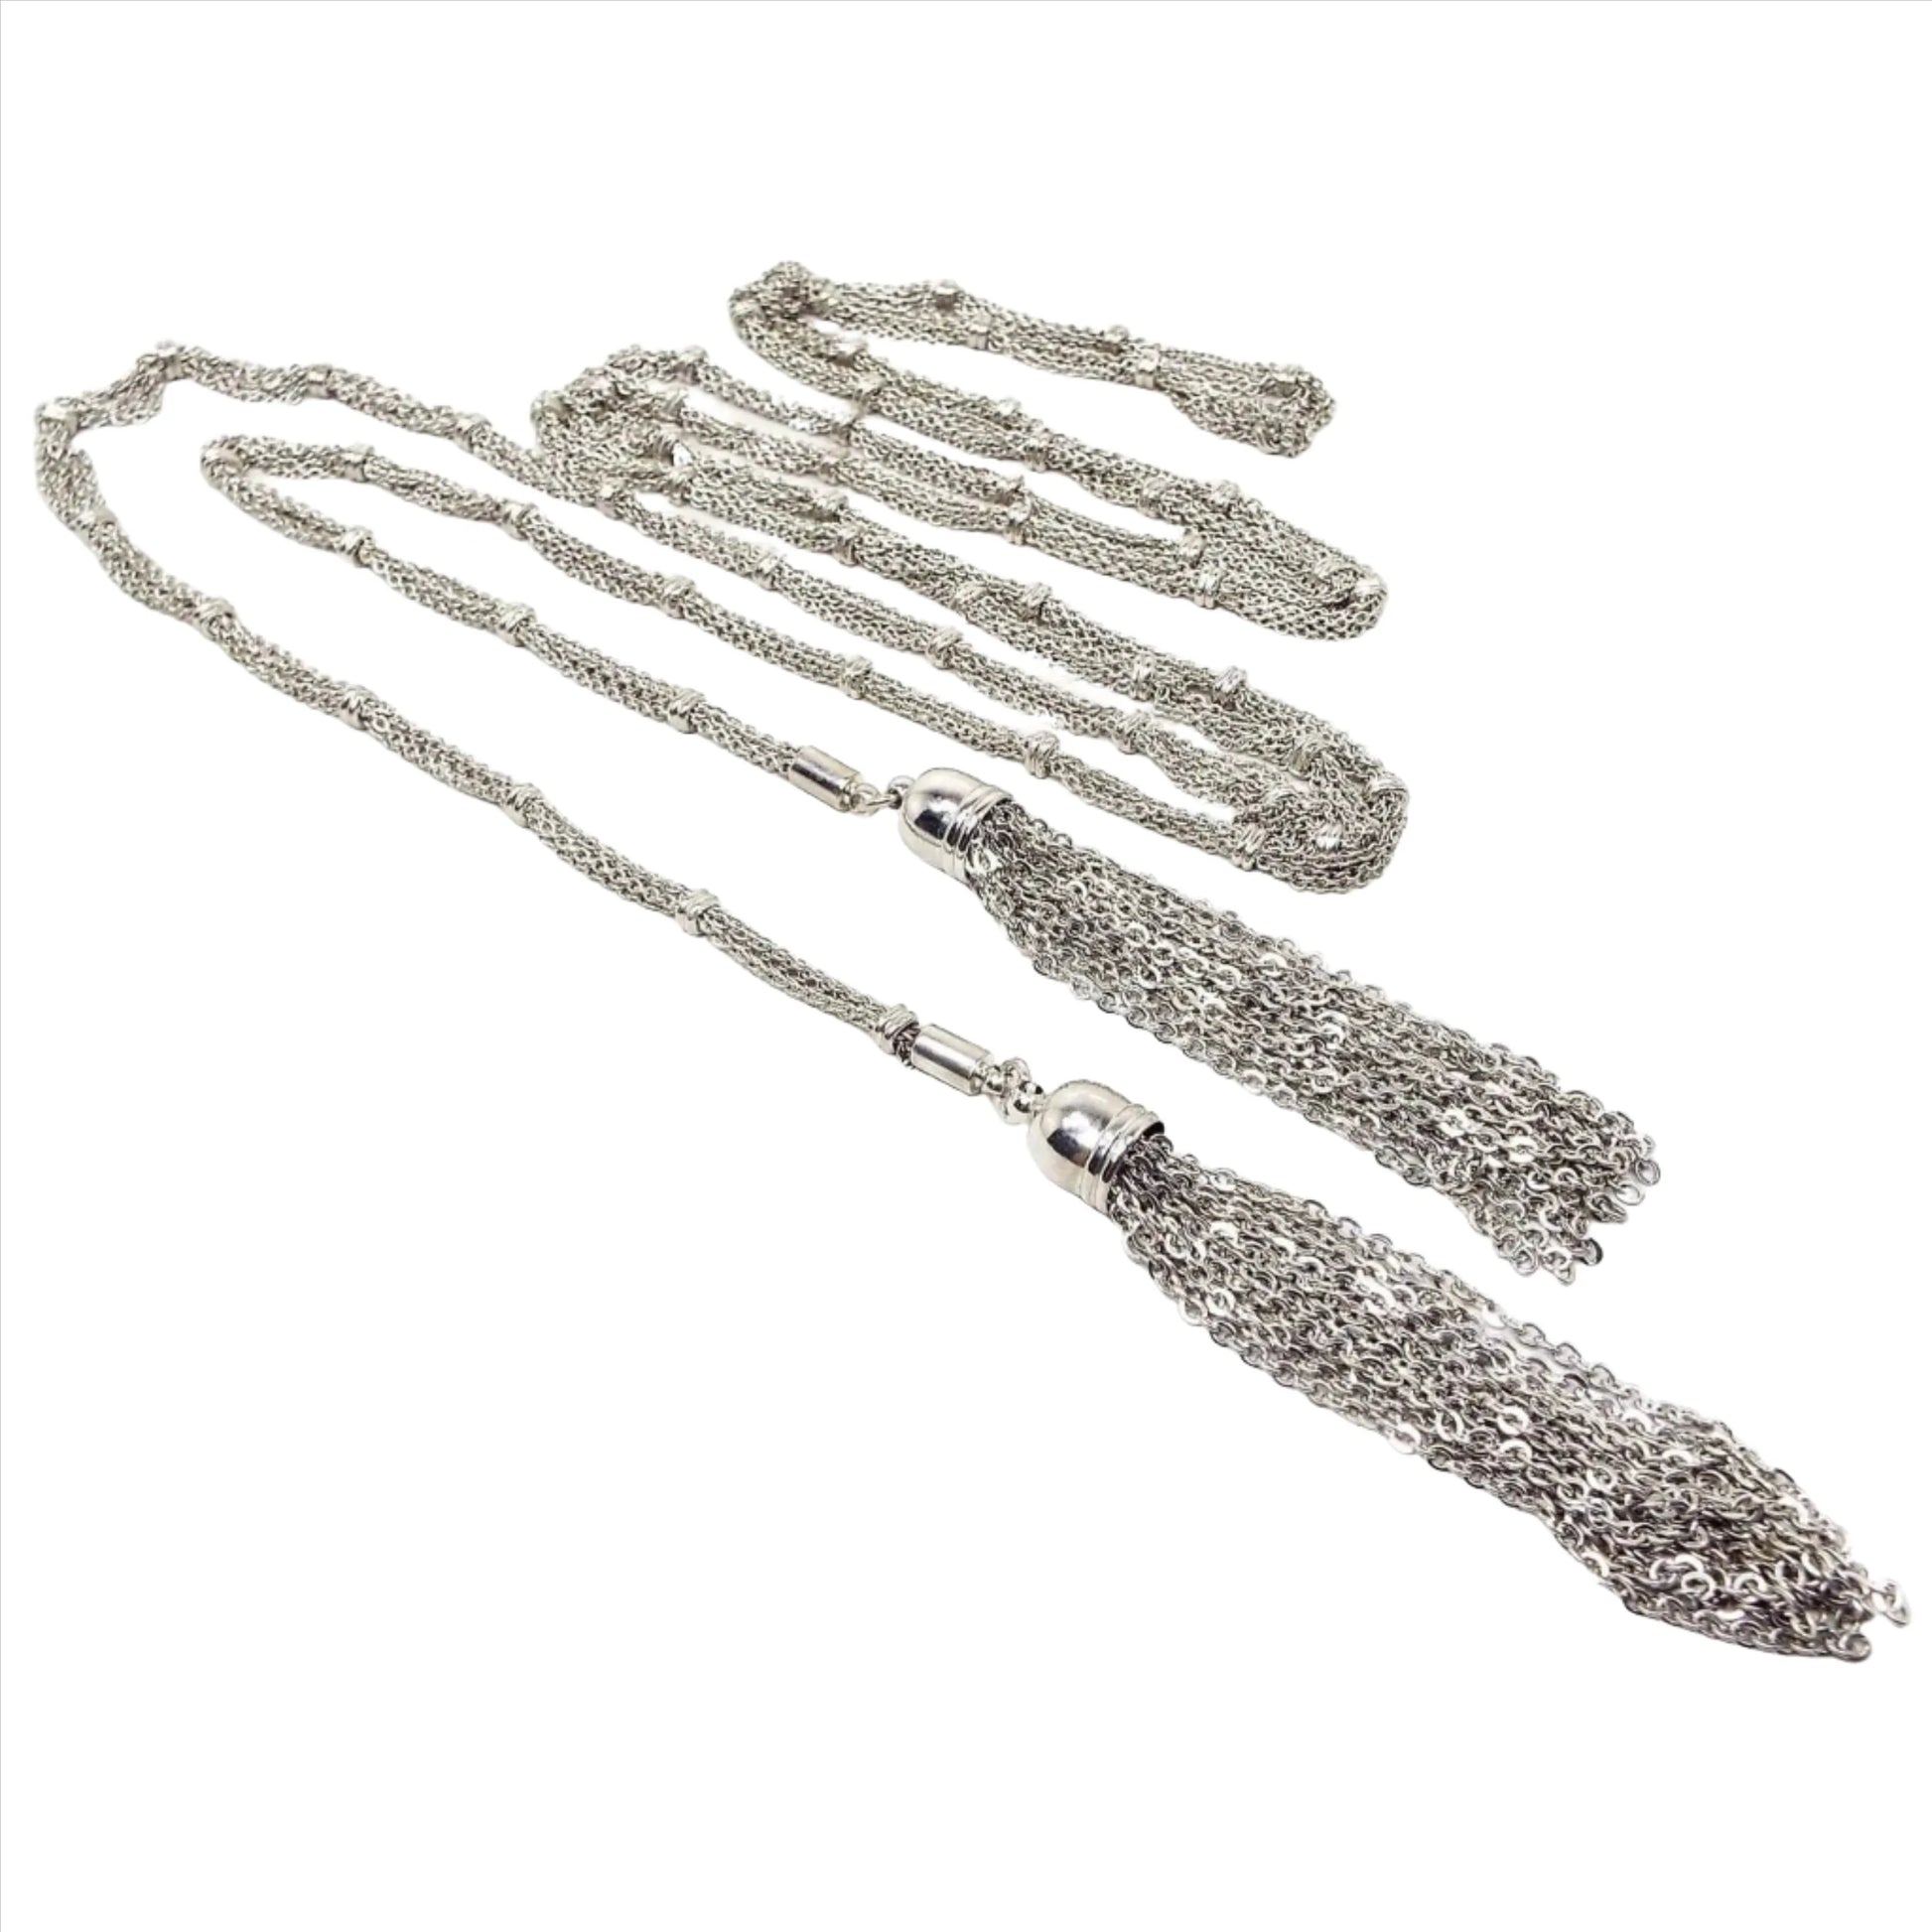 Angled top view of the long Mid Century vintage lariat chain tassel necklace. The metal is silver tone in color. the main part of the necklace has multi strands of oval link cable chain held together by spaced round open beads. The end tassels have a domed cap and several strands of round link rolo chain dangling from each end. There is no clasp as you wrap the necklace around yourself lariat style.